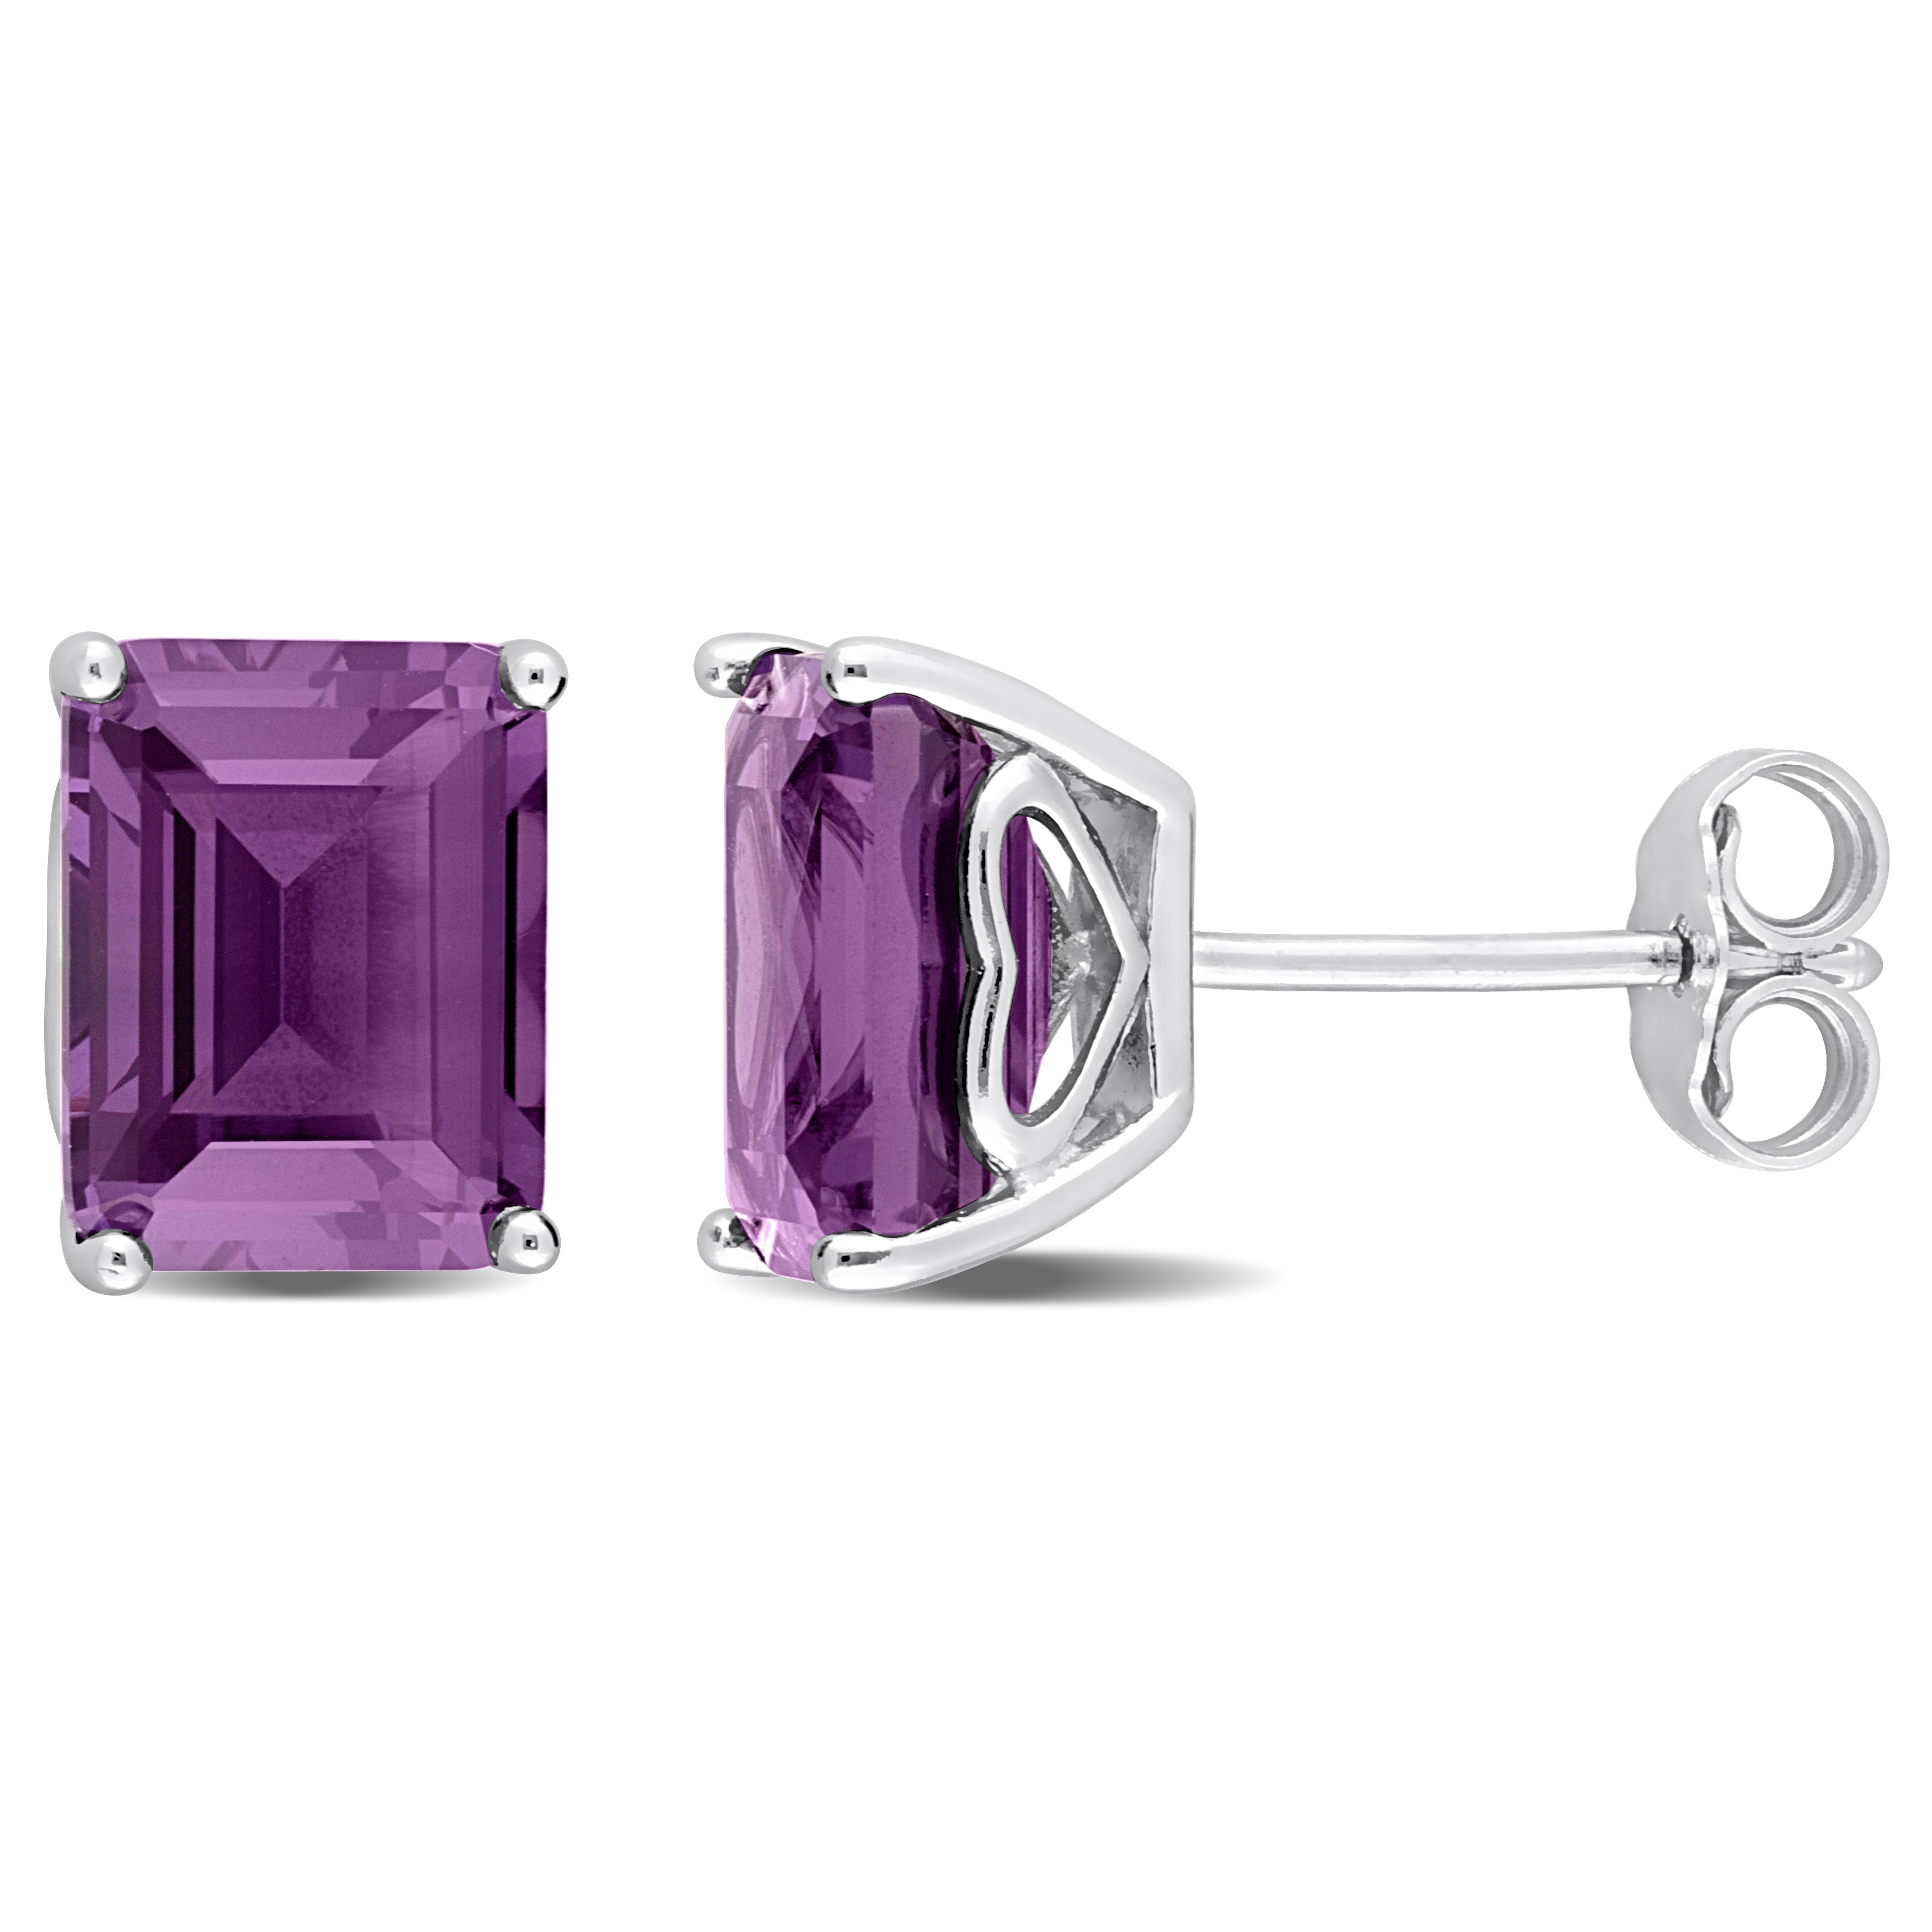 4 3/4 CT TGW Octagon Simulated Alexandrite Earrings in Sterling Silver